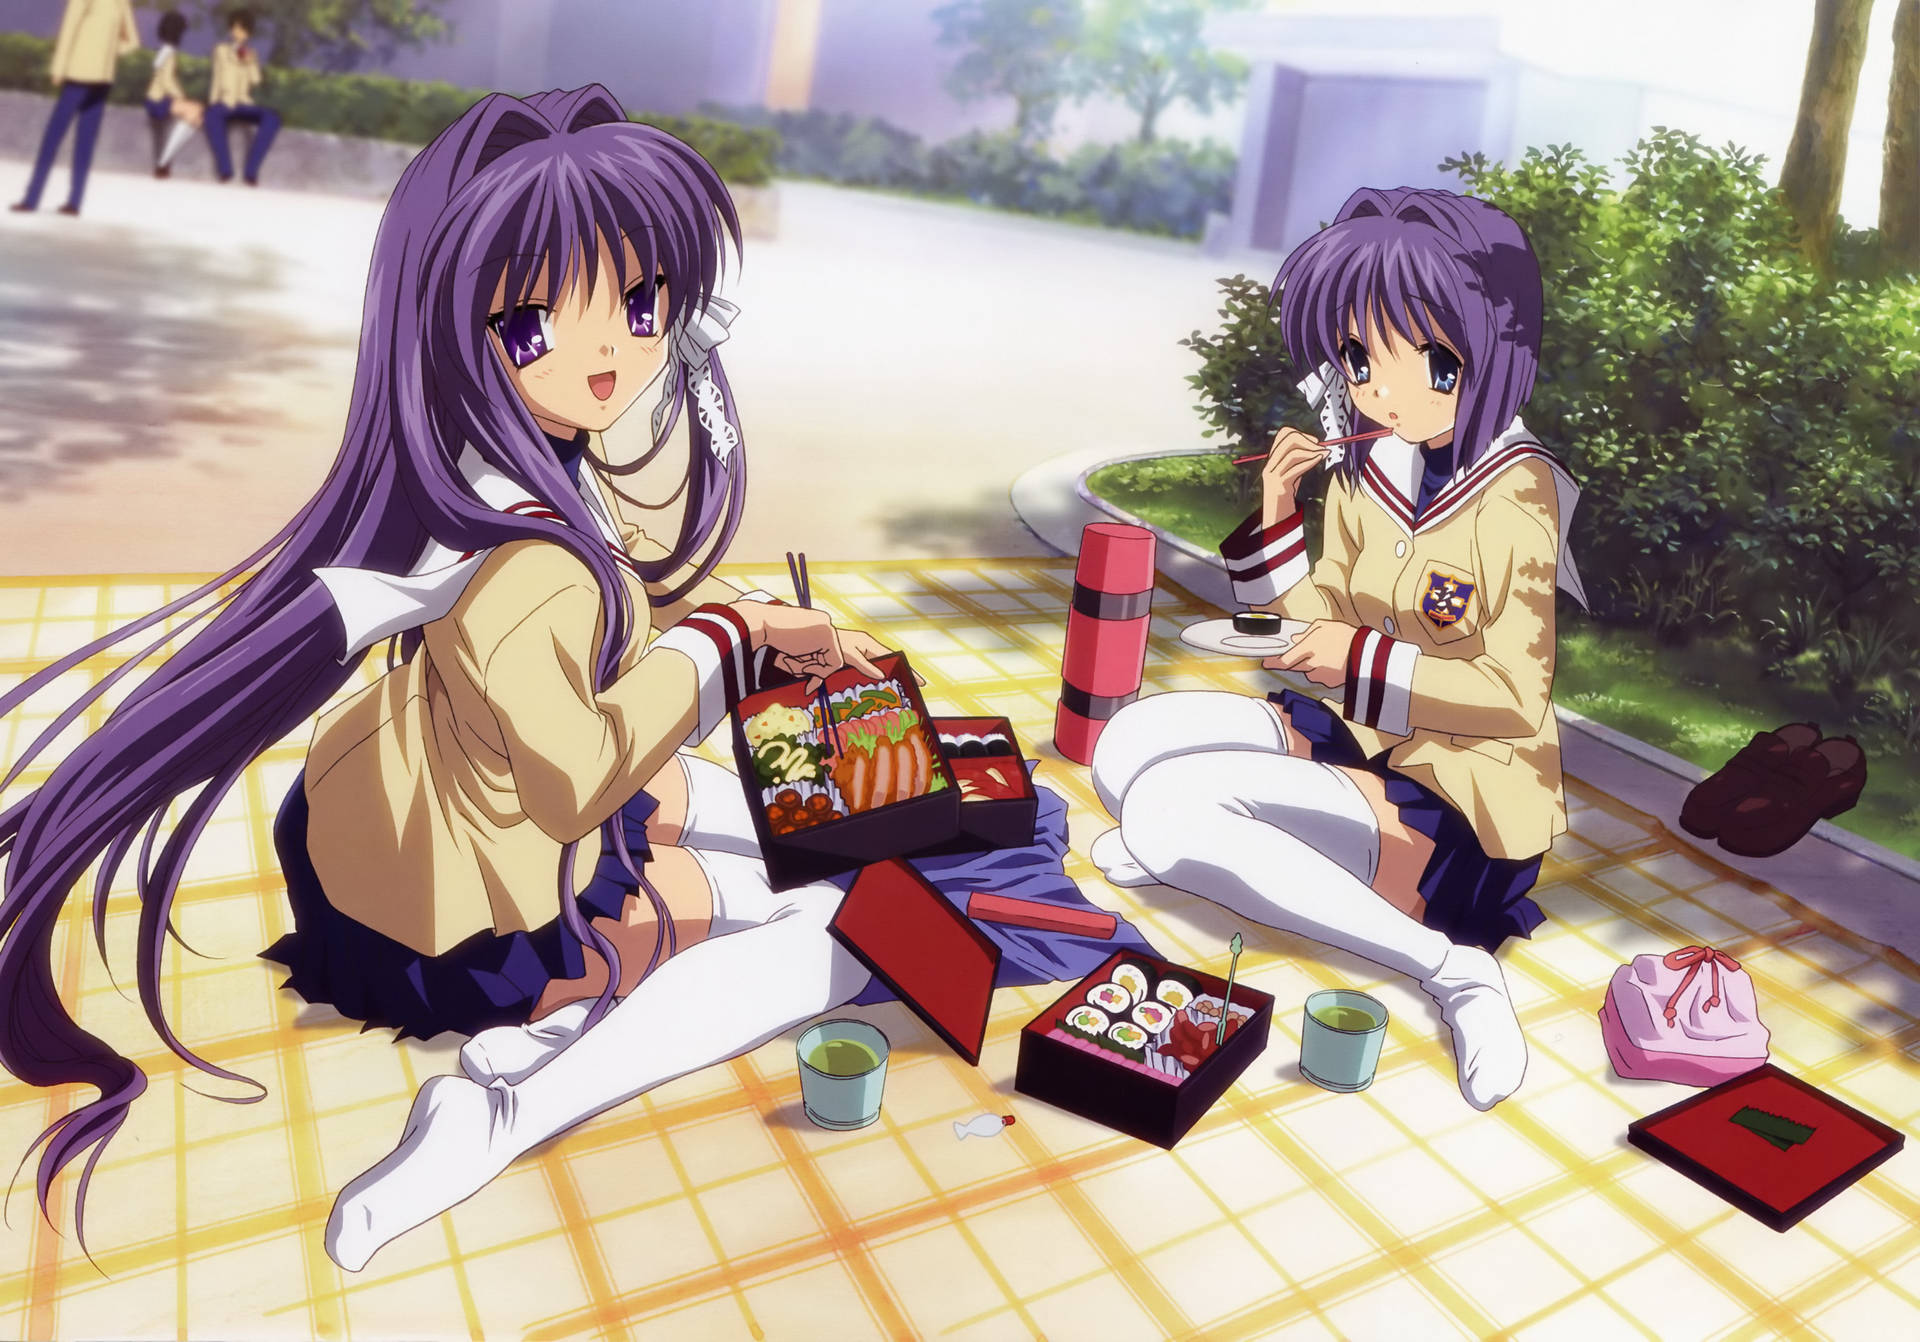 Kyou And Ryou Clannad Wallpaper